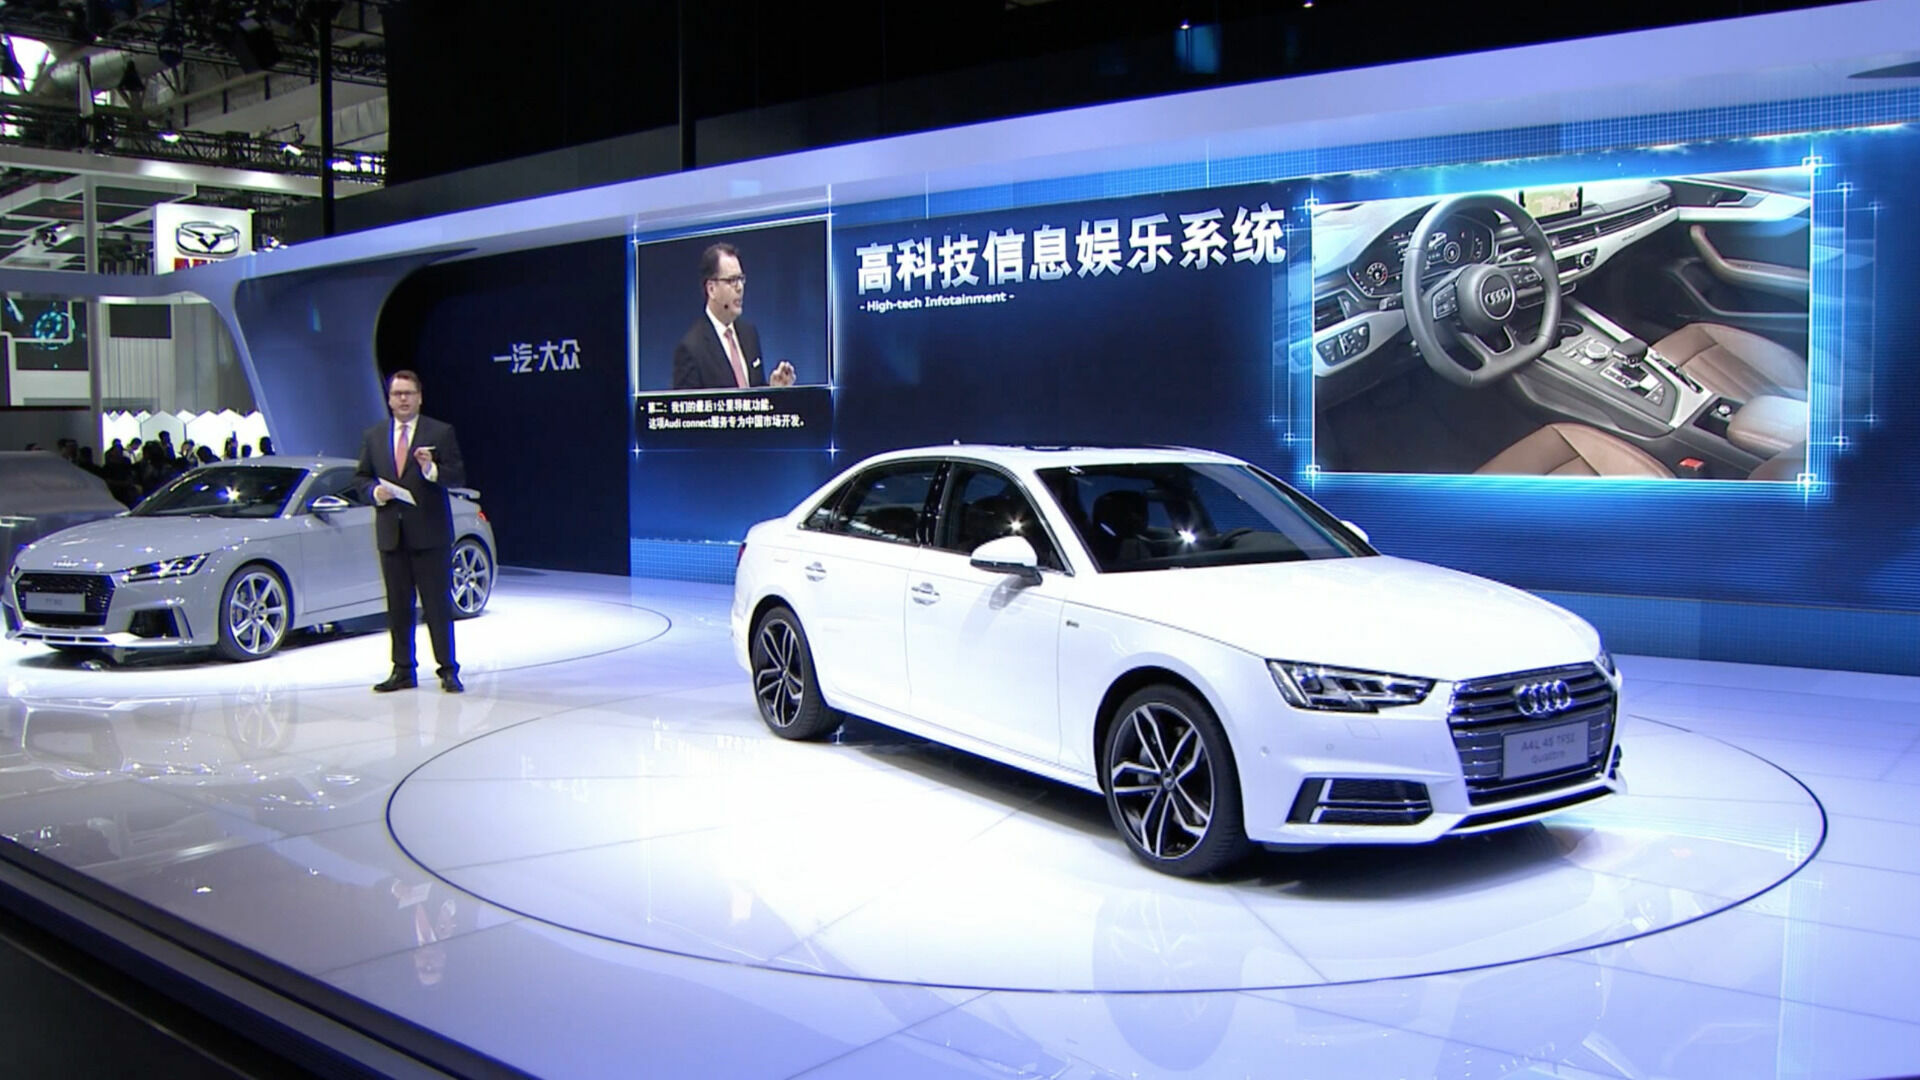 Auto China 2016 in Beijing - The Highlights